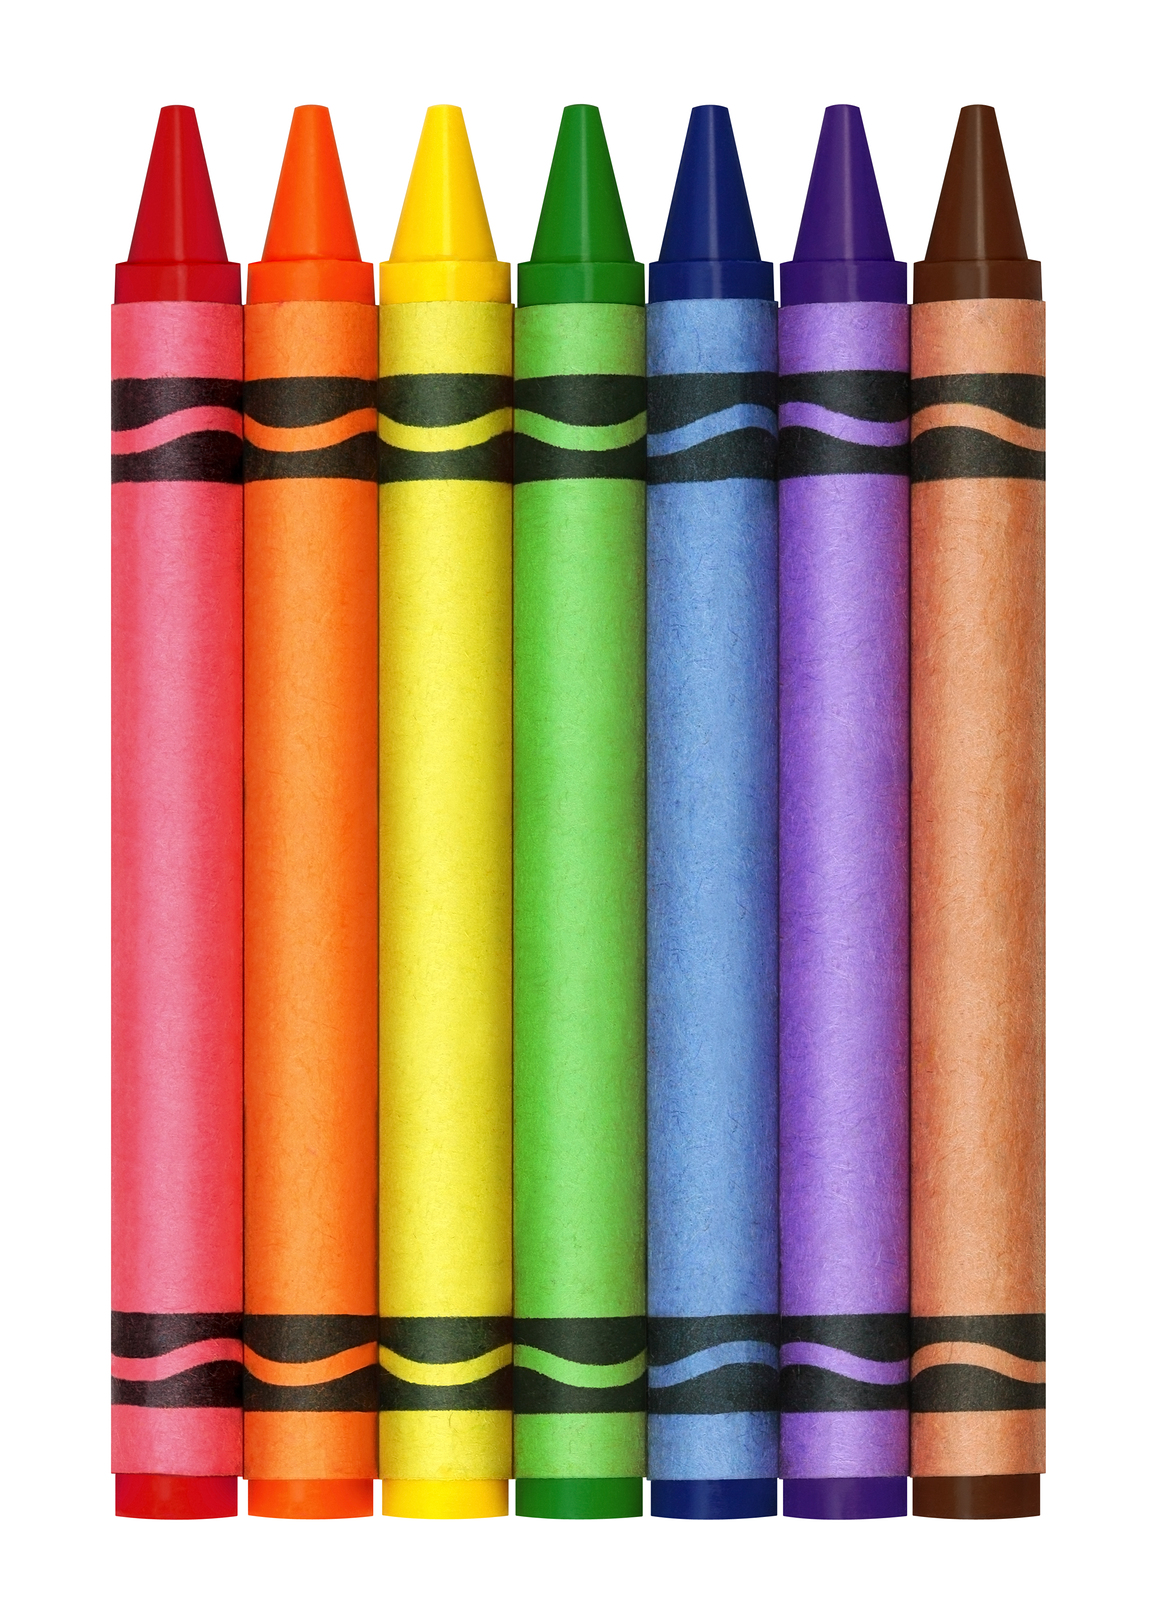 99.9 KONY COUNTRY | Crayon Drawings Banned at Utah State Prison